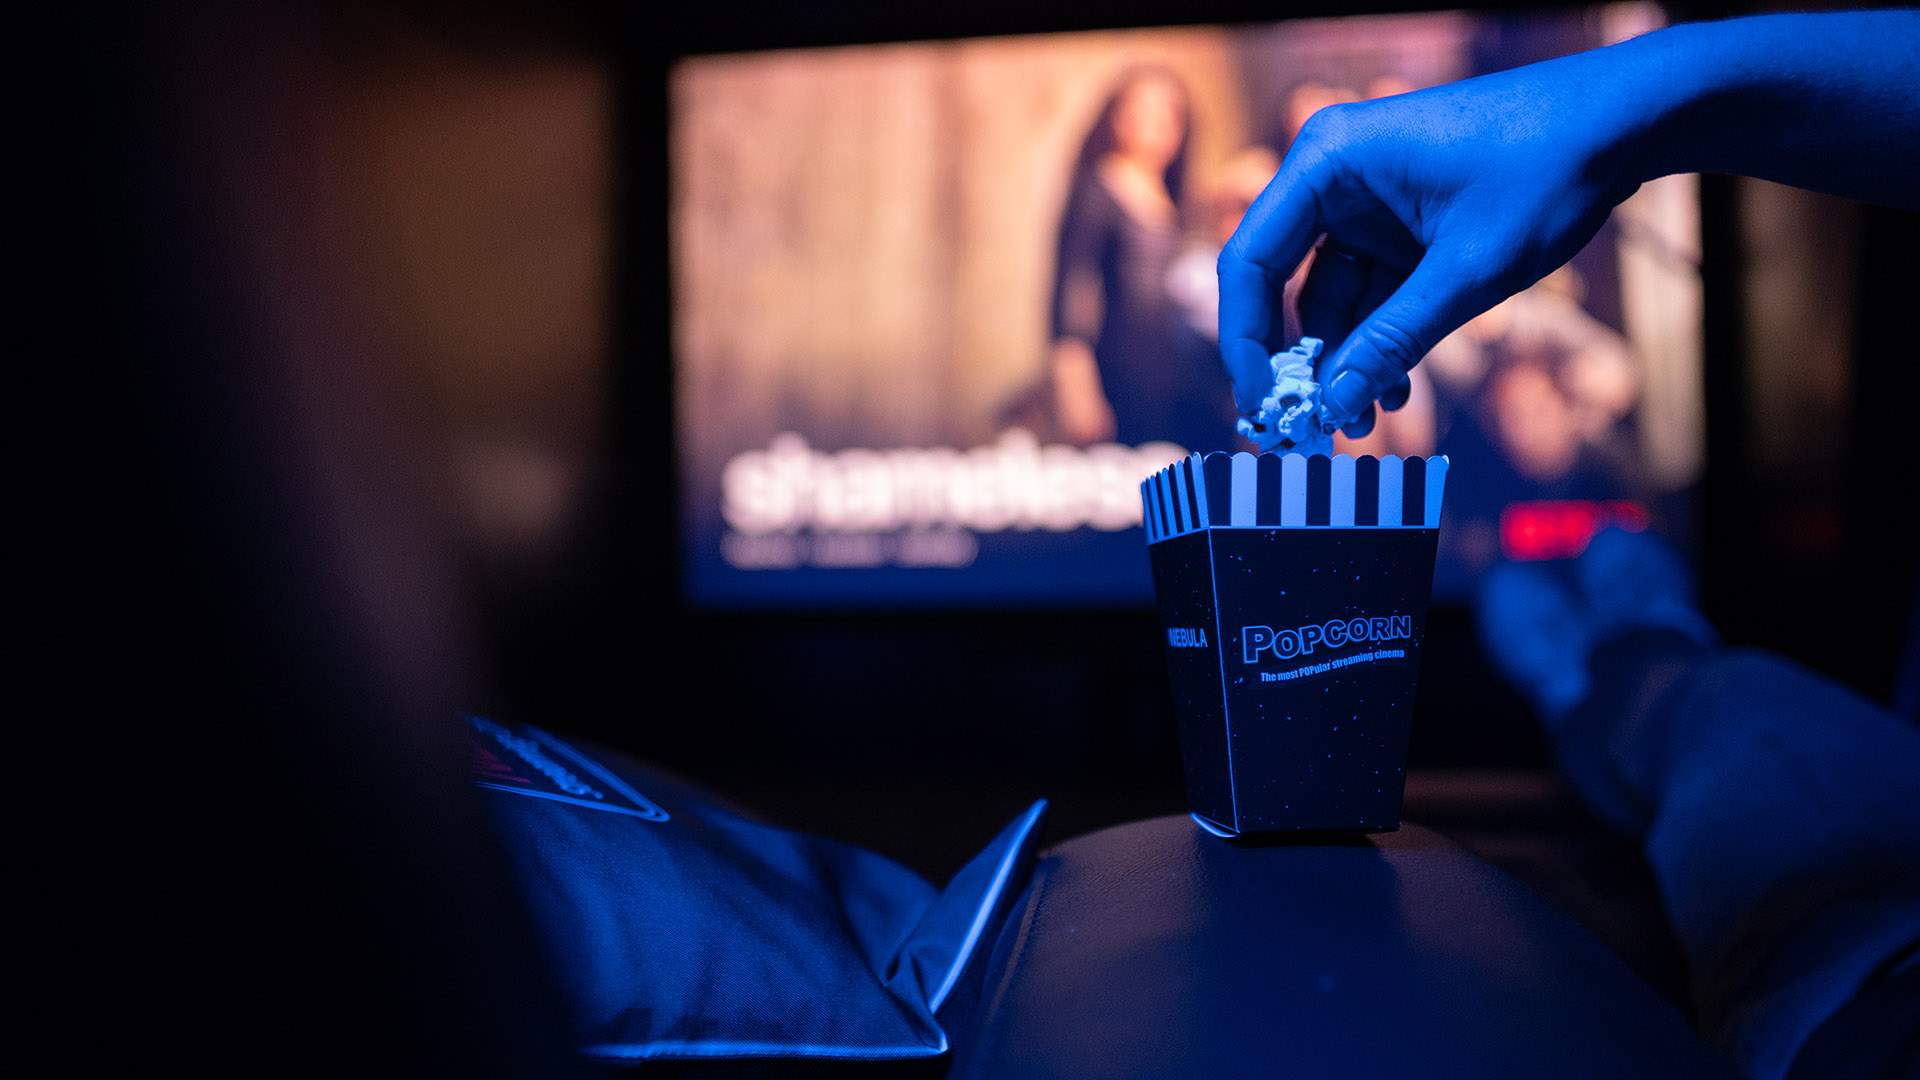 Sydney Just Scored Australia's First (and Free) Pop-Up Streaming Cinema